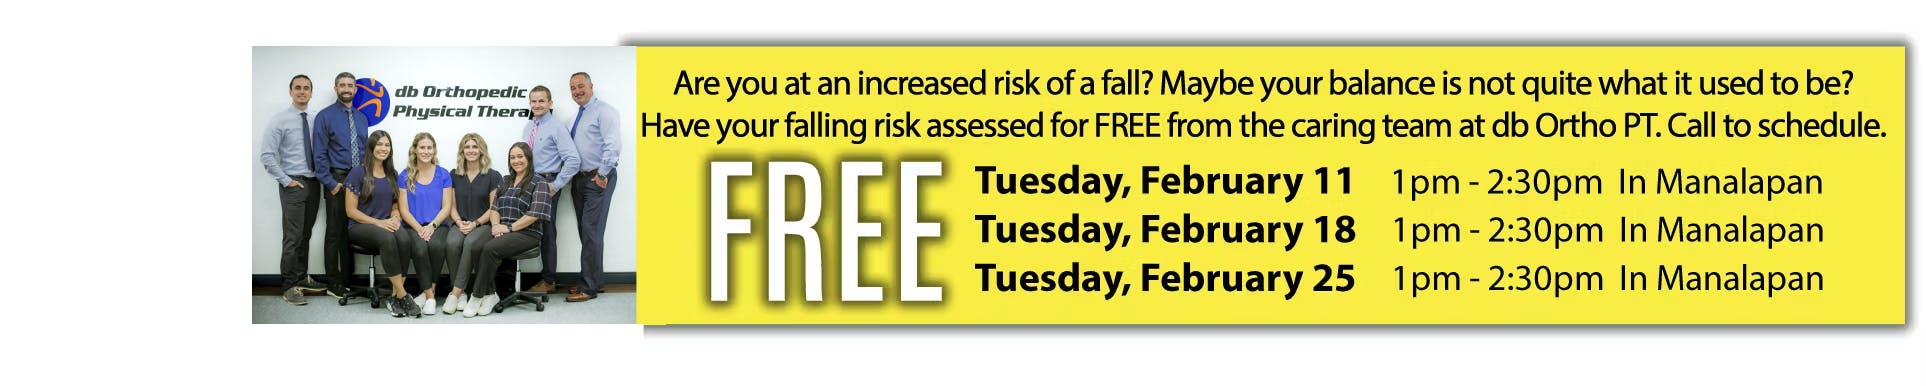 Are you at an increased risk of fall? Maybe your balance is not quite what it used to be? Have you falling risk assed for FREE from the caring team at dbOrtho PT. Call to schedule. | Tuesday, February 11th 1pm-2:30pm in Manalapan | Tuesday, February 18th 1pm-2:30pm in Manalapan | Tuesday, February 25th 1pm-2:30pm in Manalapan